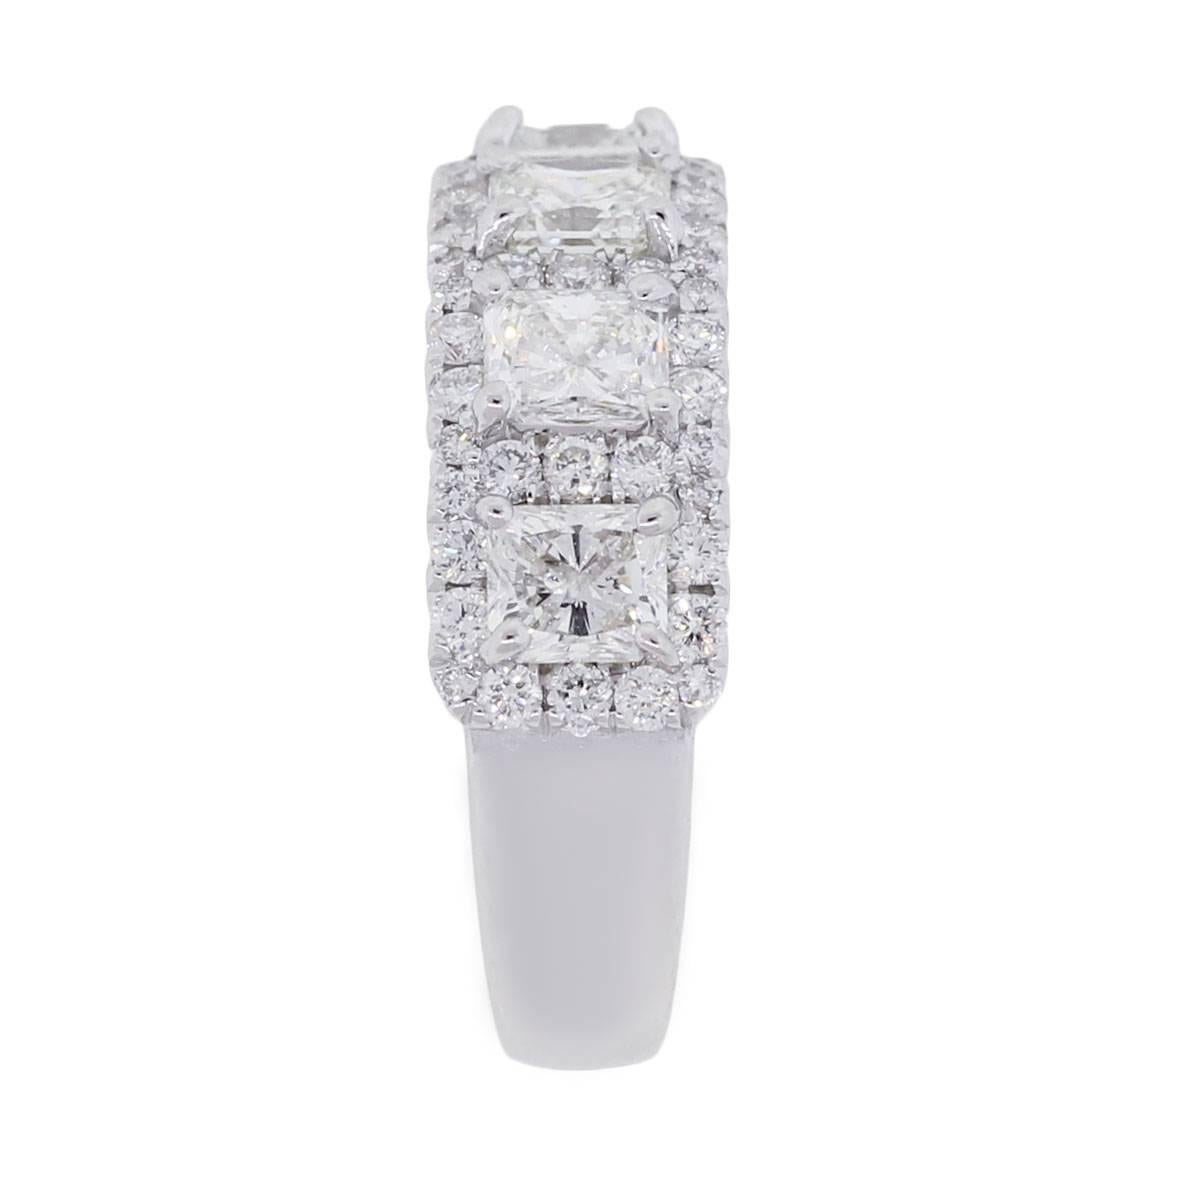 Material: 18k white gold
Diamond Details: Approximately 2.24ctw of round brilliant and radiant shape diamonds. Diamonds are F/G in color and VS in clarity
Ring Size: 6 (can be sized)
Ring Measurements: 0.87″ x 0.27″ x 0.87″
Total Weight: 6g